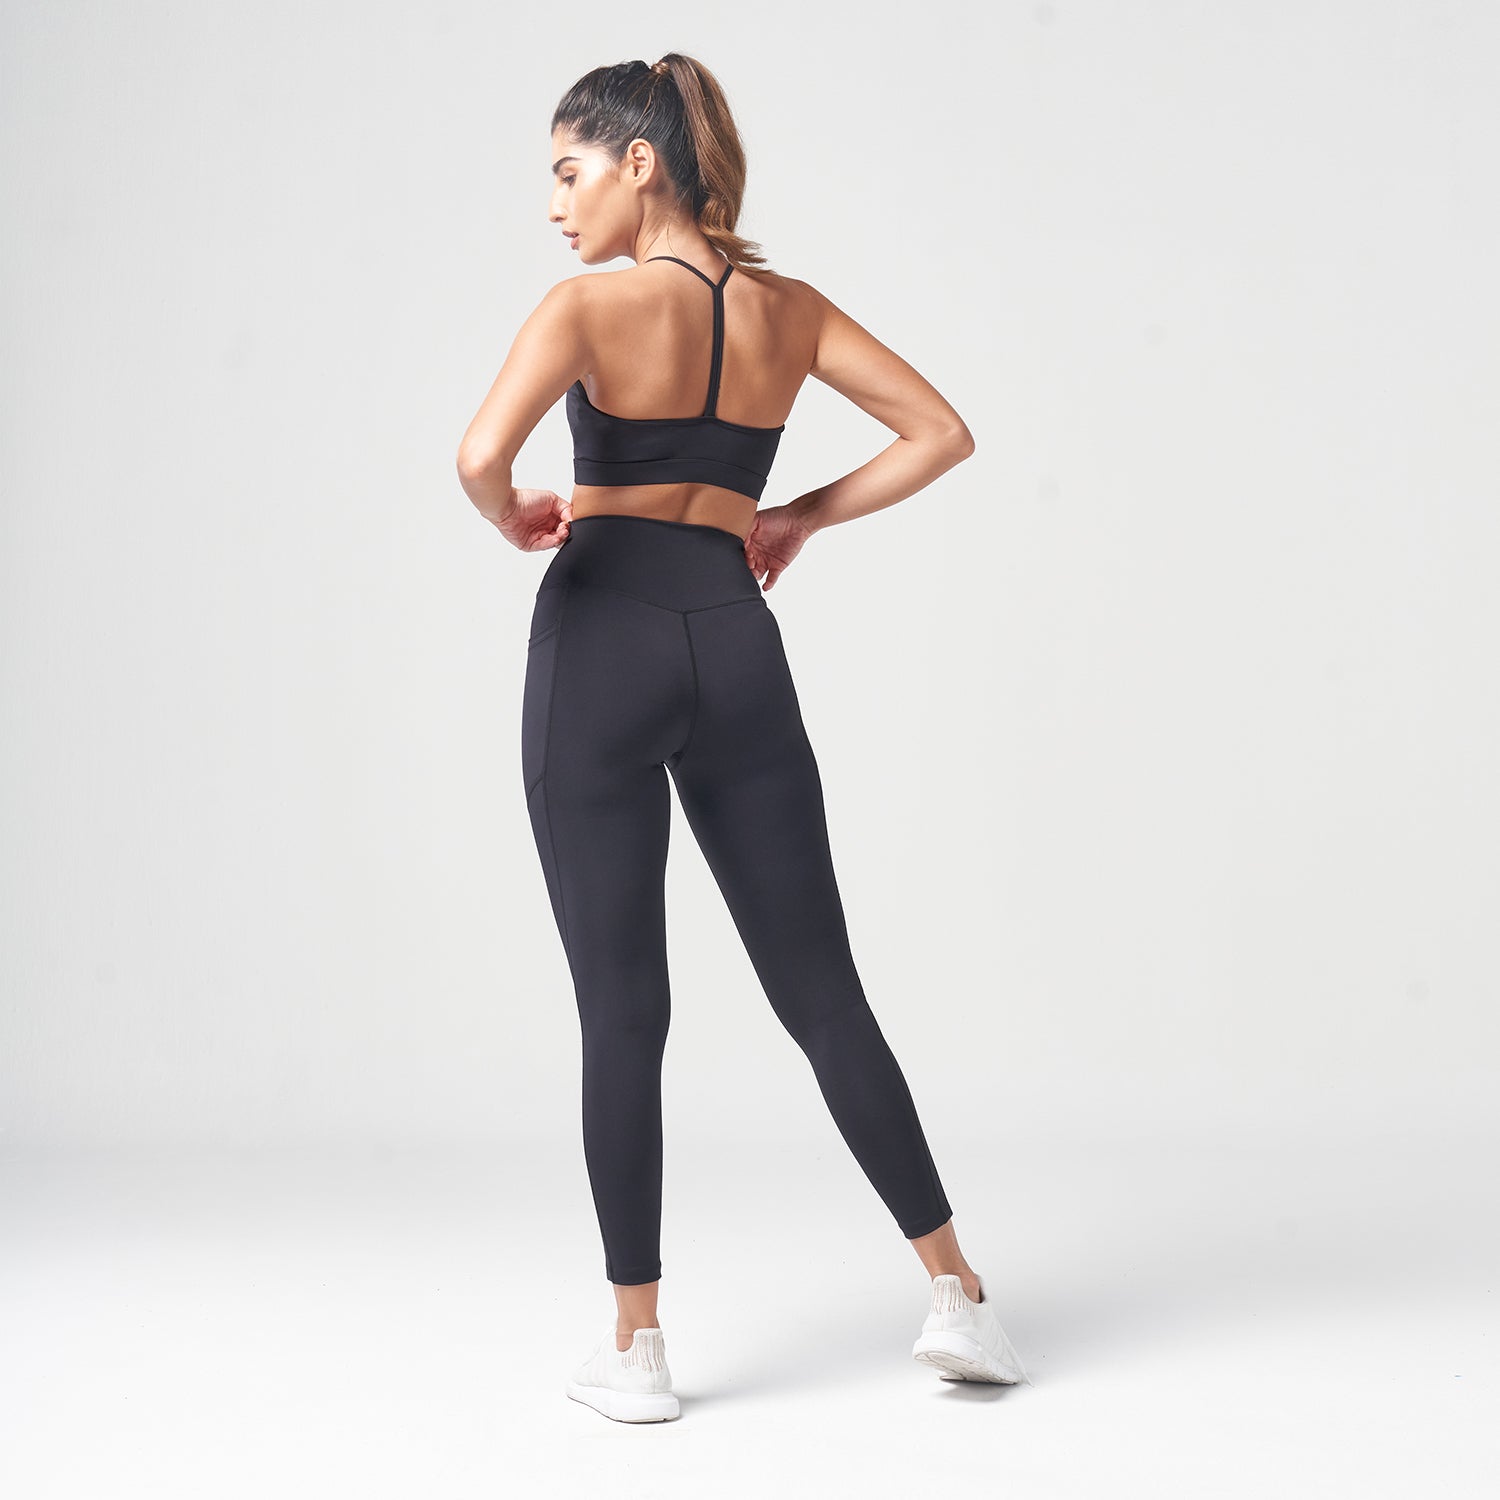 squatwolf-workout-clothes-essential-cropped-leggings-black-gym-leggings-for-women